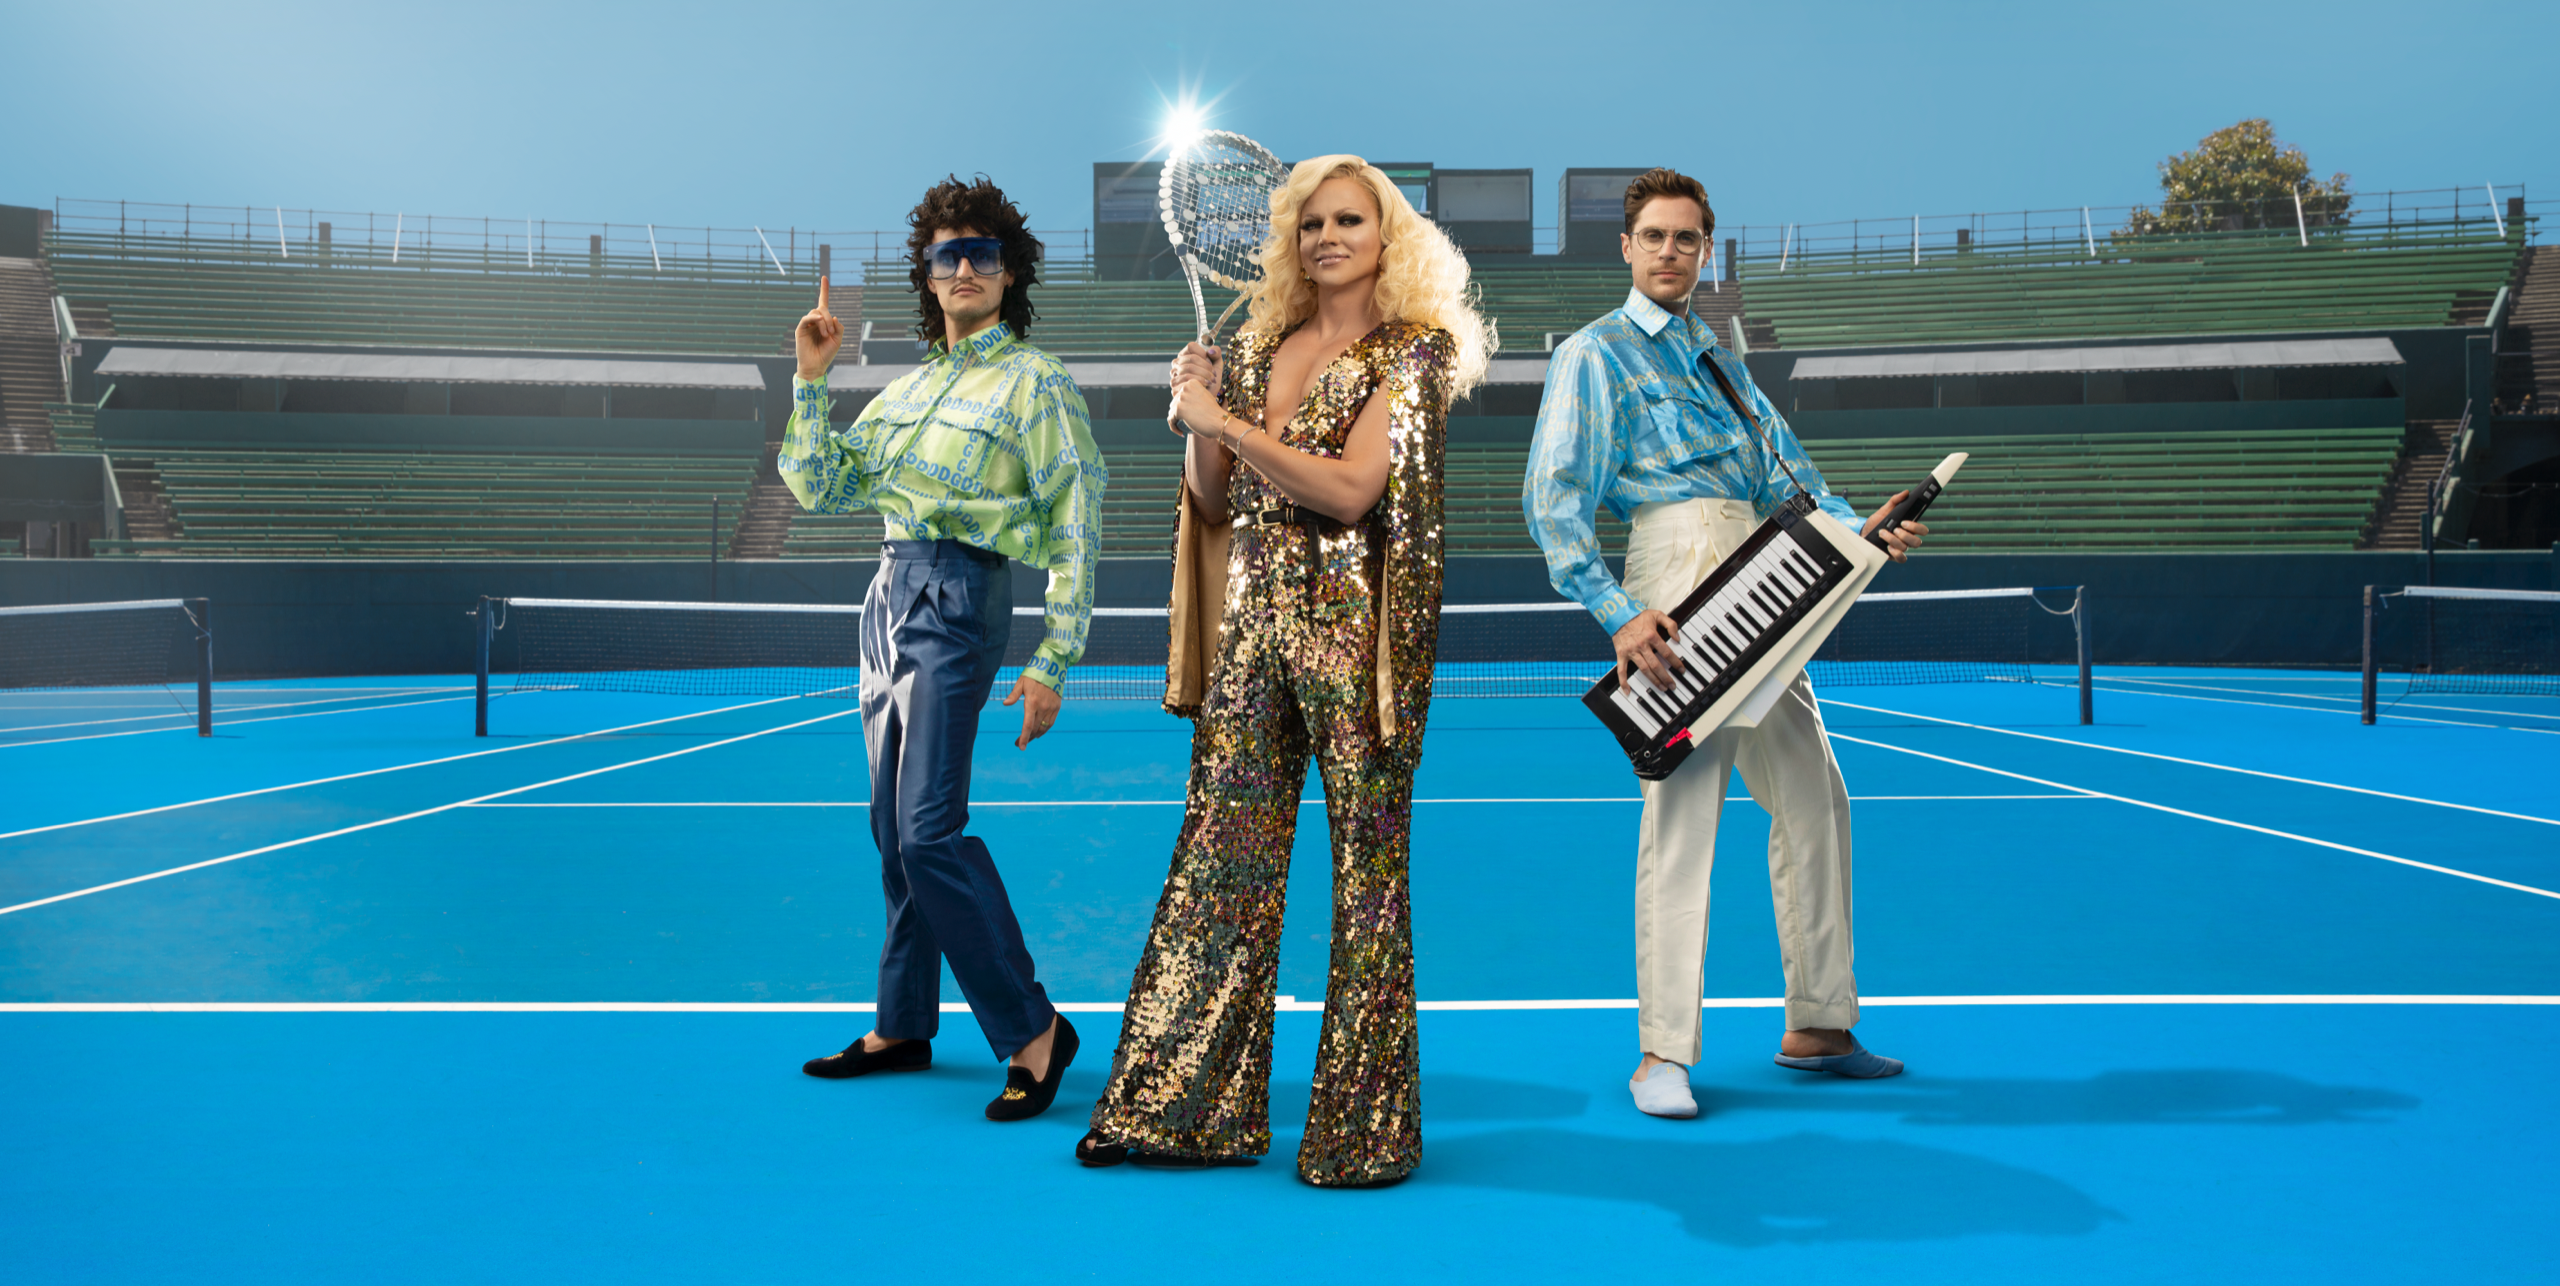 The Aus Open Is Throwing An Inclusive Glam Slam Party To Promo LGBTQIA+ Safety In Sport